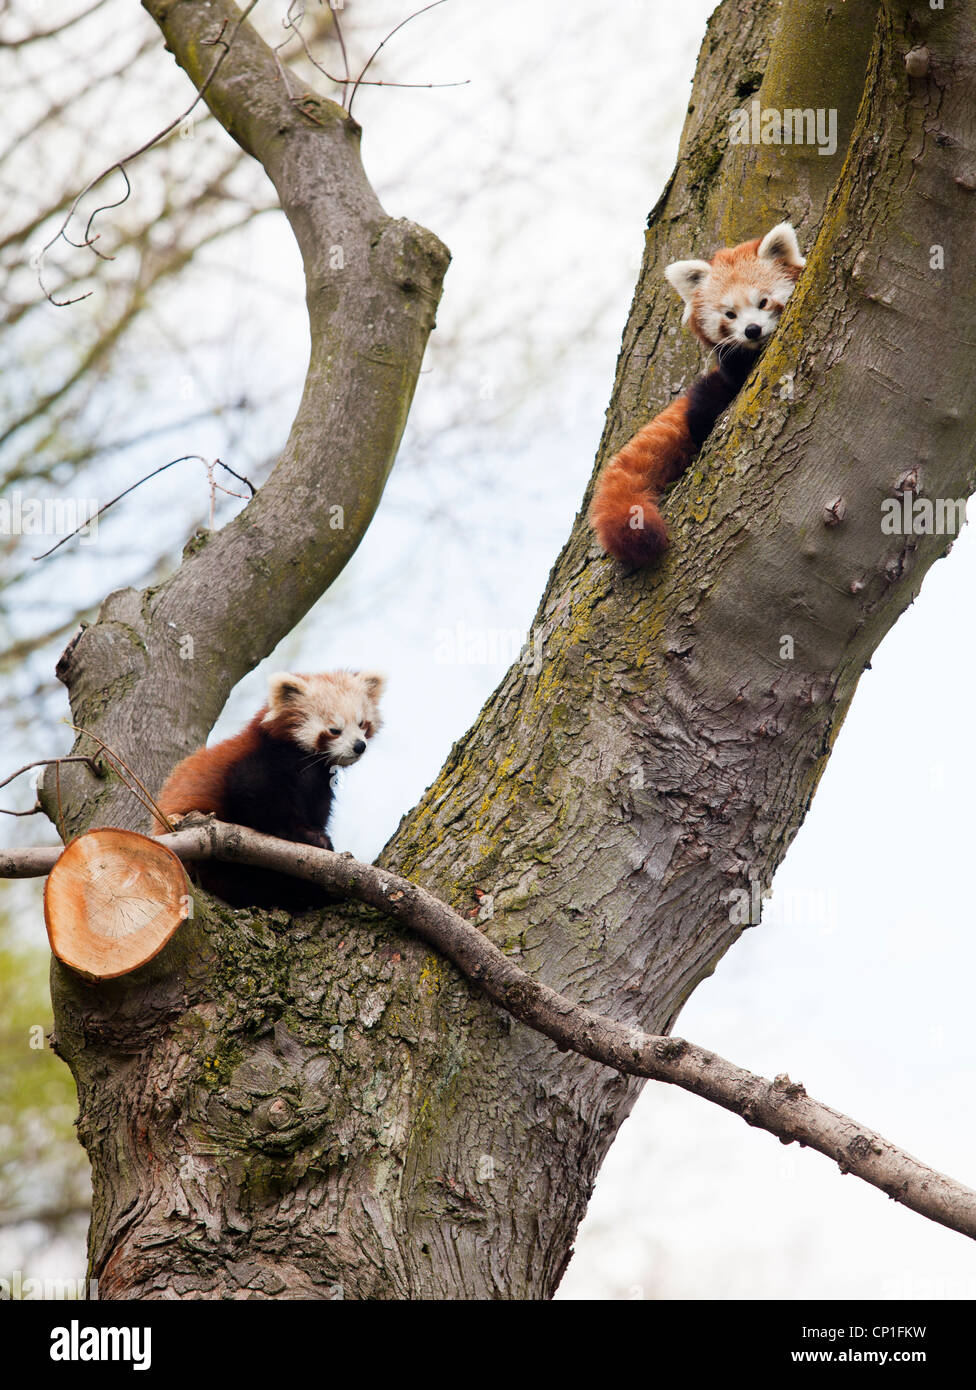 a male and female red panda up a tree in an enclosure at Birmingham Nature centre in the UK Stock Photo